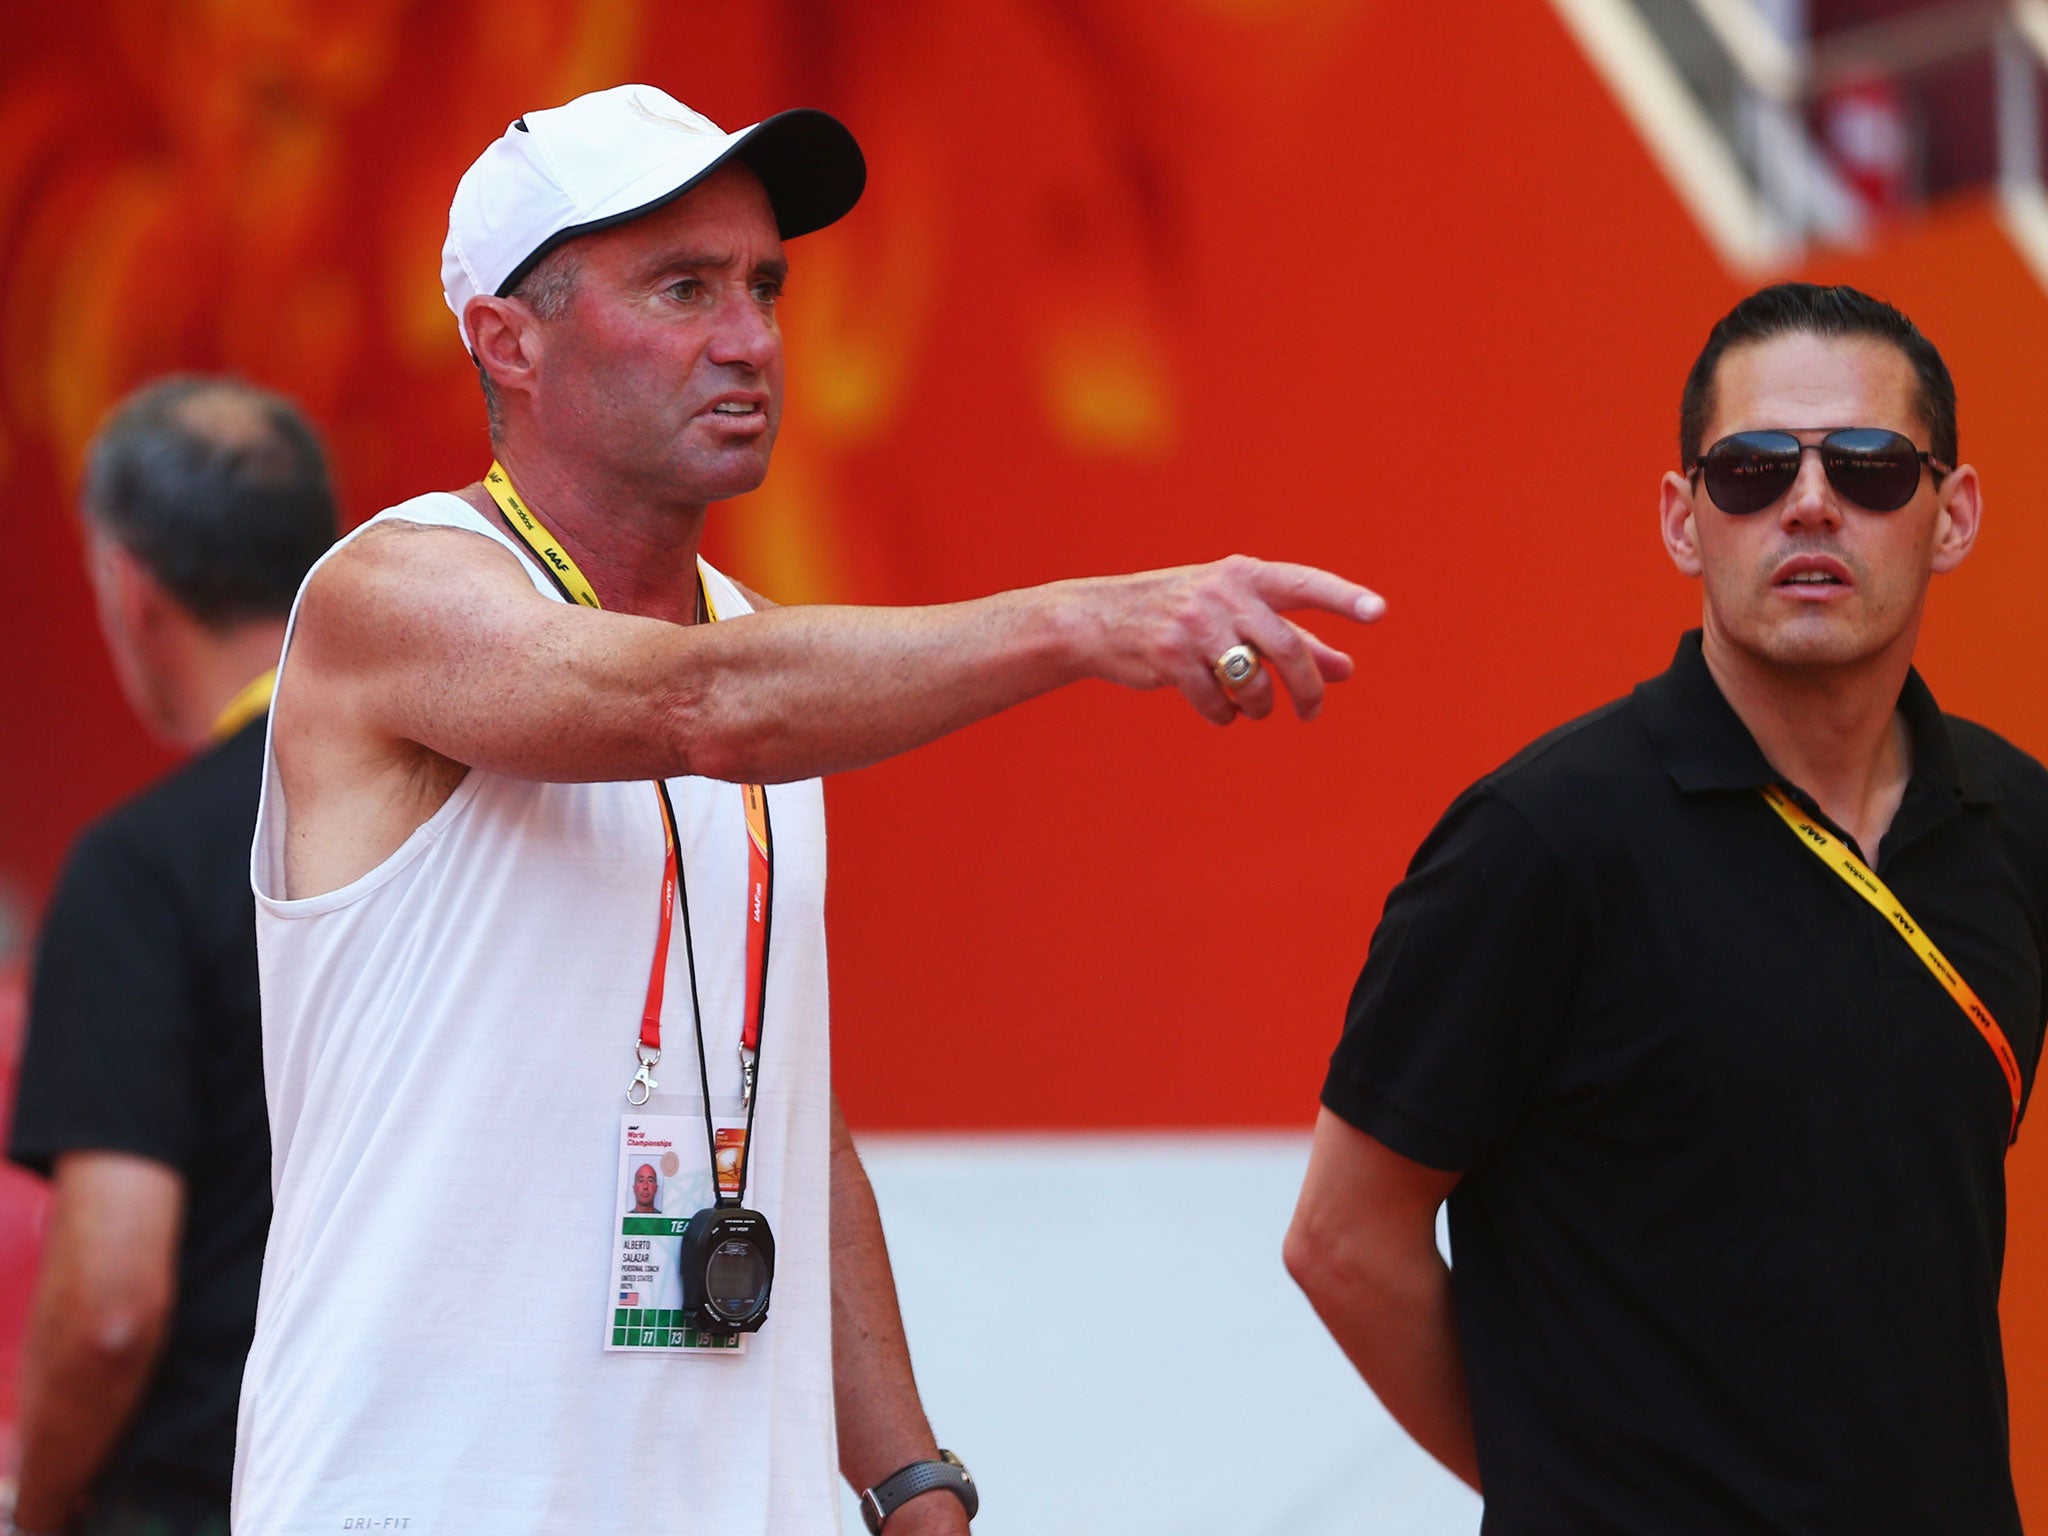 Alberto Salazar runs the Nike Oregon Project, which is currently being investigated by USAD